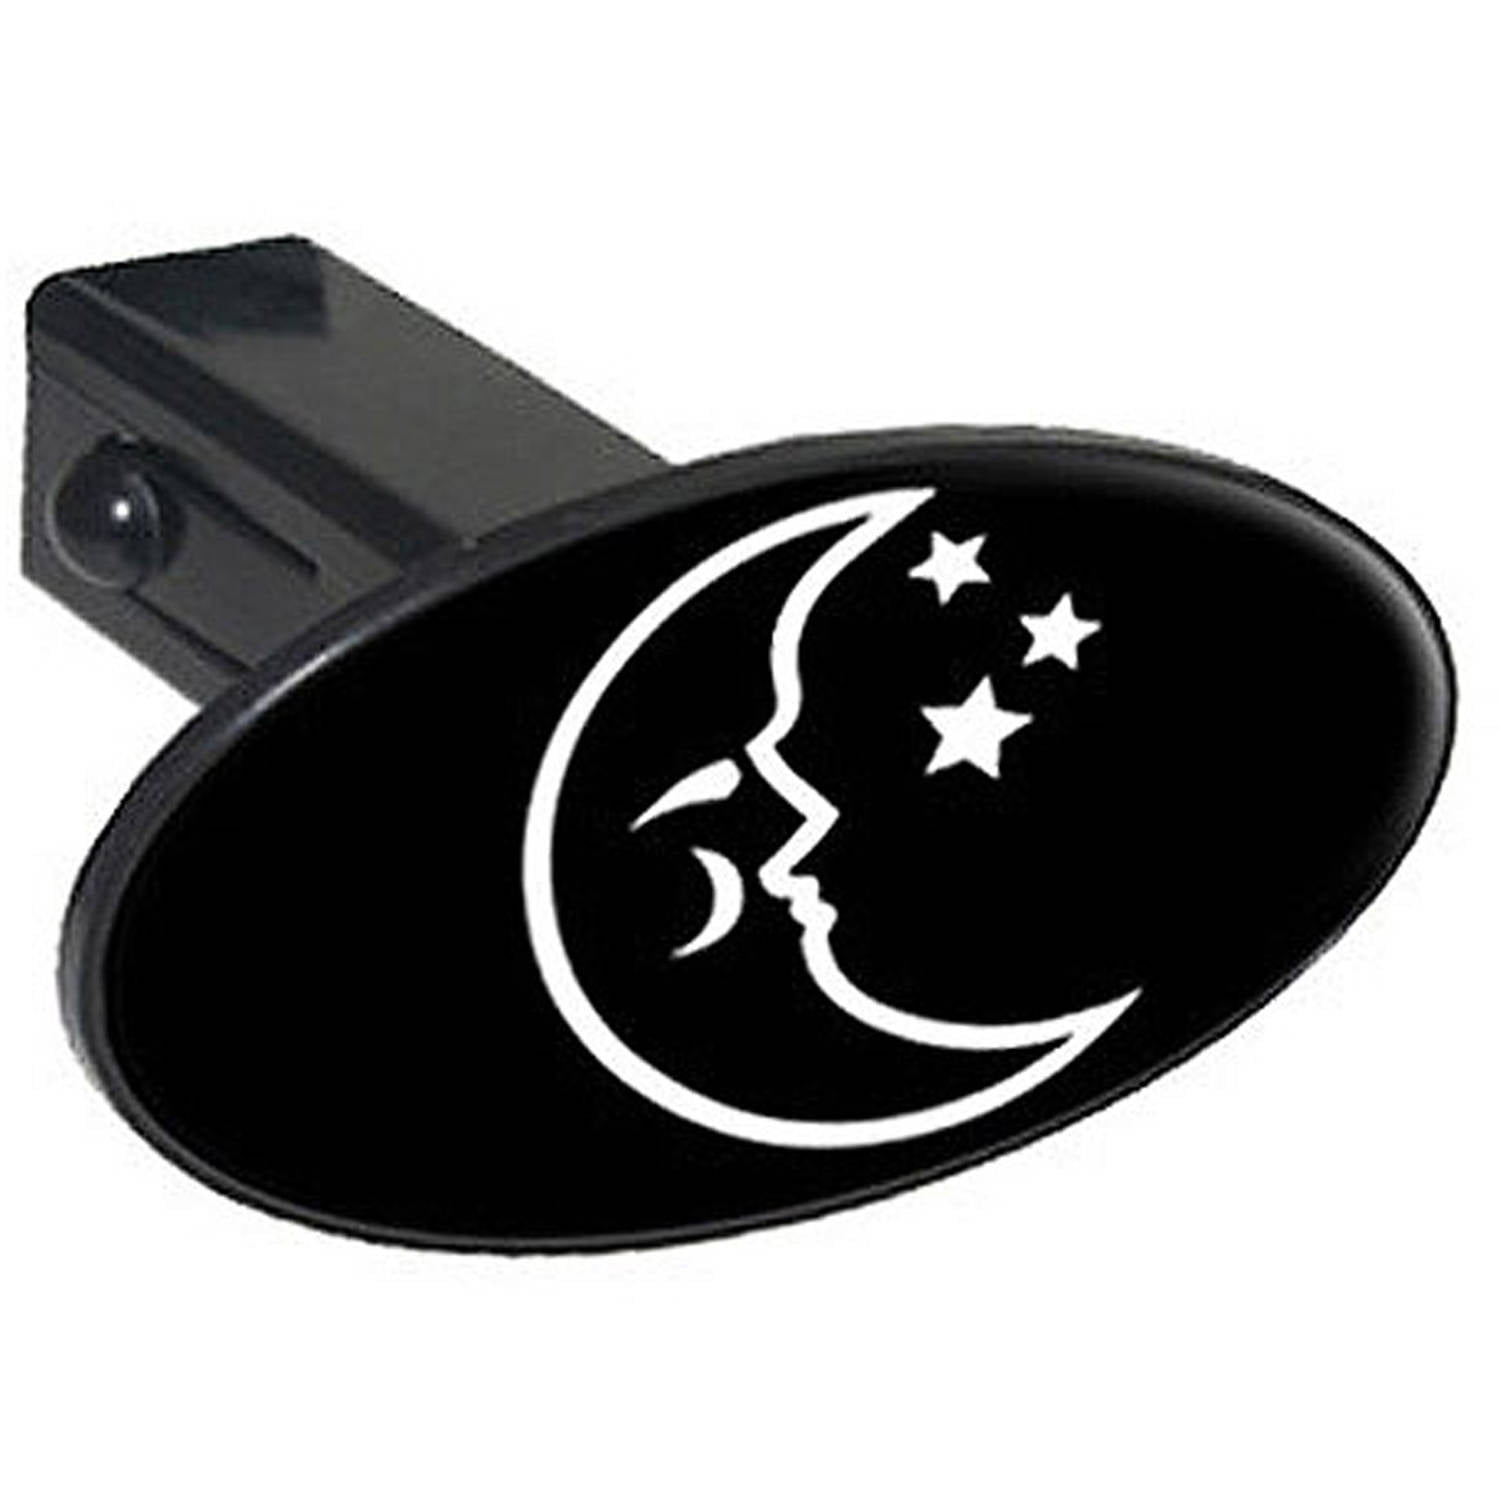 Moon and Stars Oval Tow Trailer Hitch Cover Plug Insert 2 